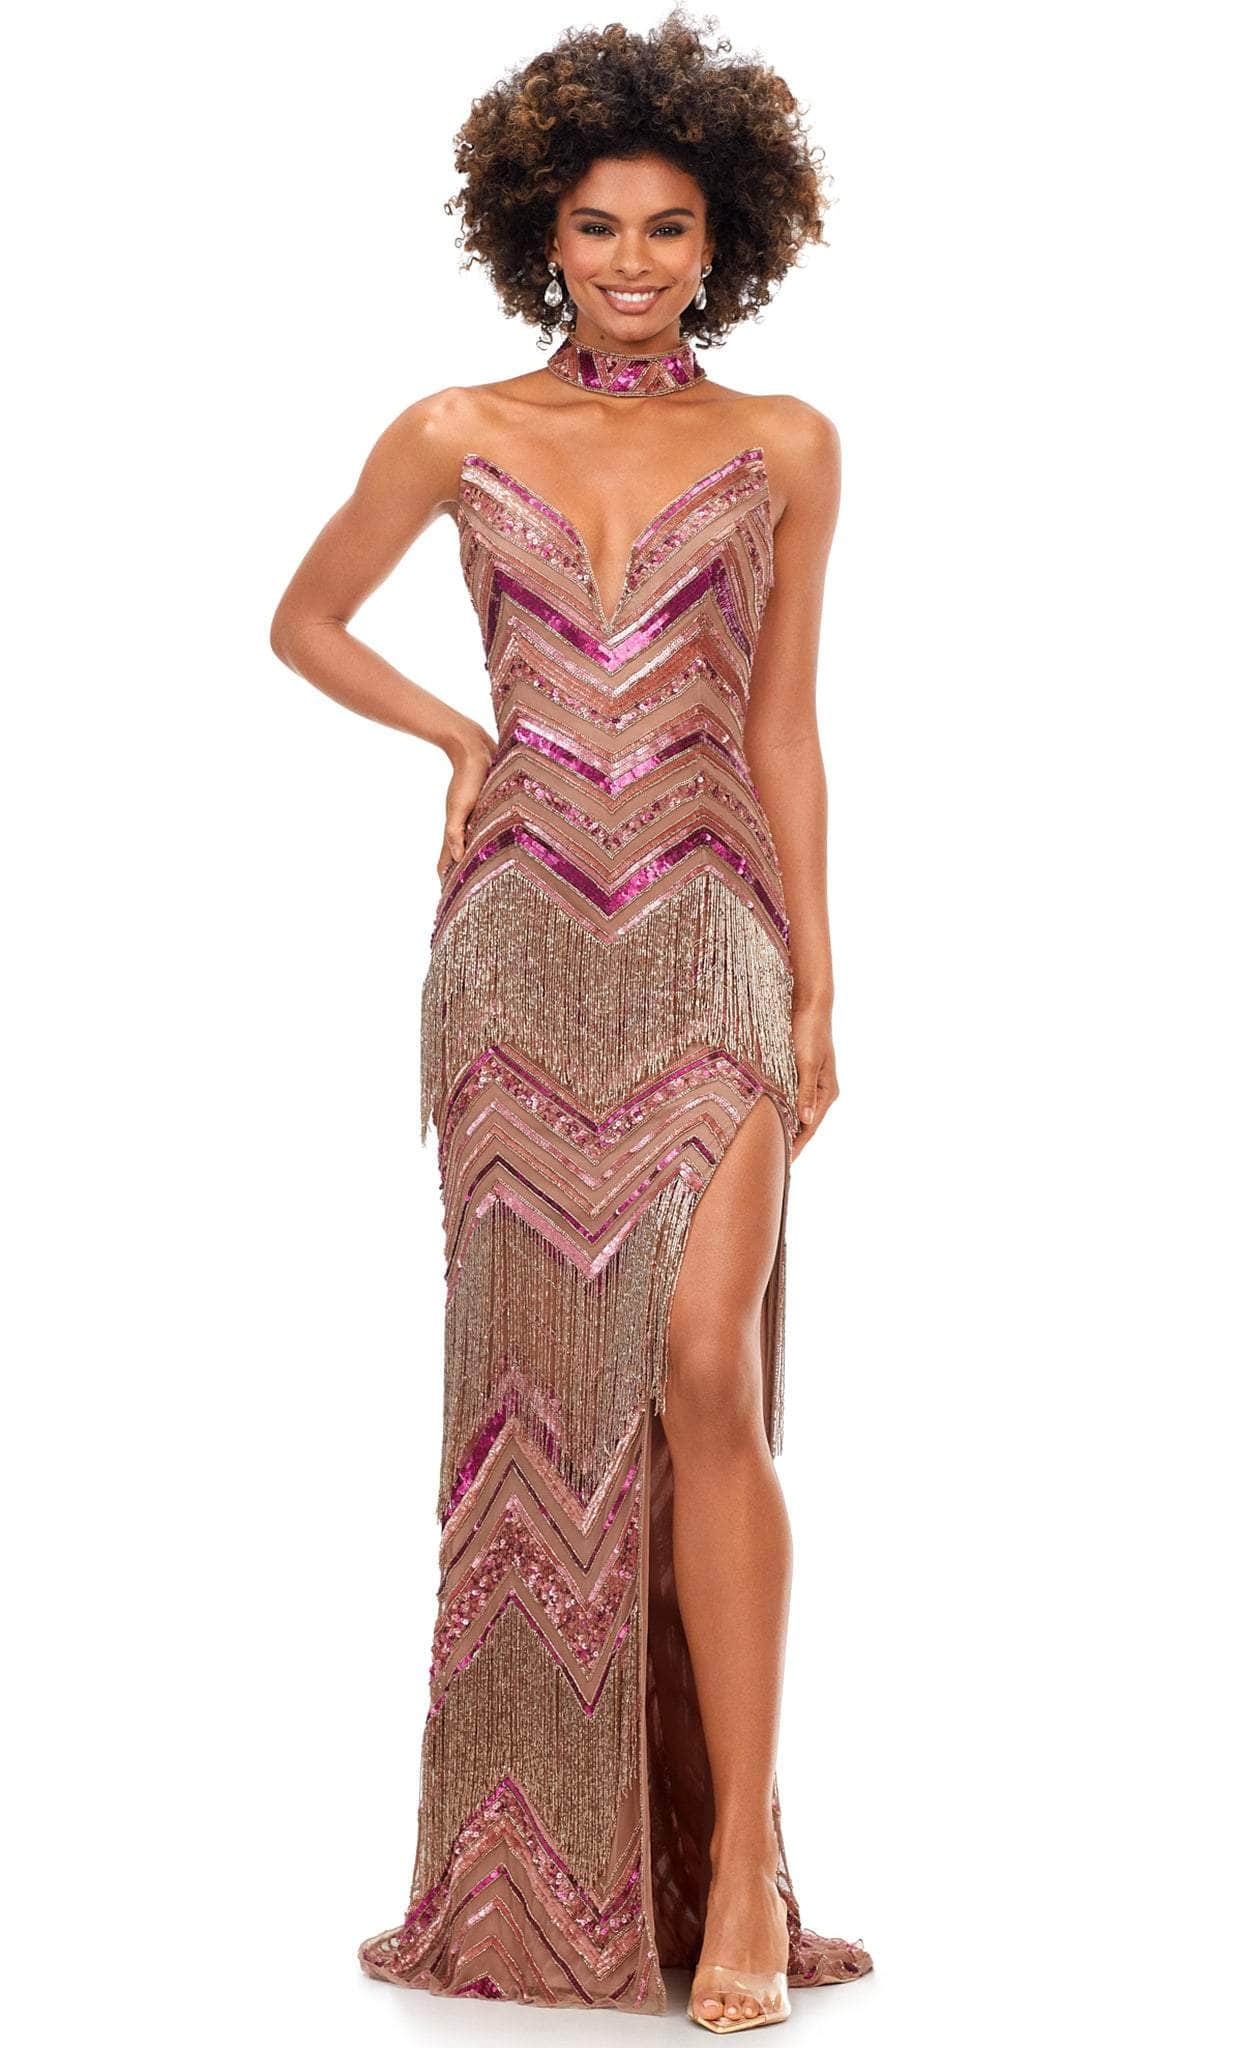 Ashley Lauren 11259 - Strapless With Collar Evening Gown Special Occasion Dress 0 / Multi/Nude